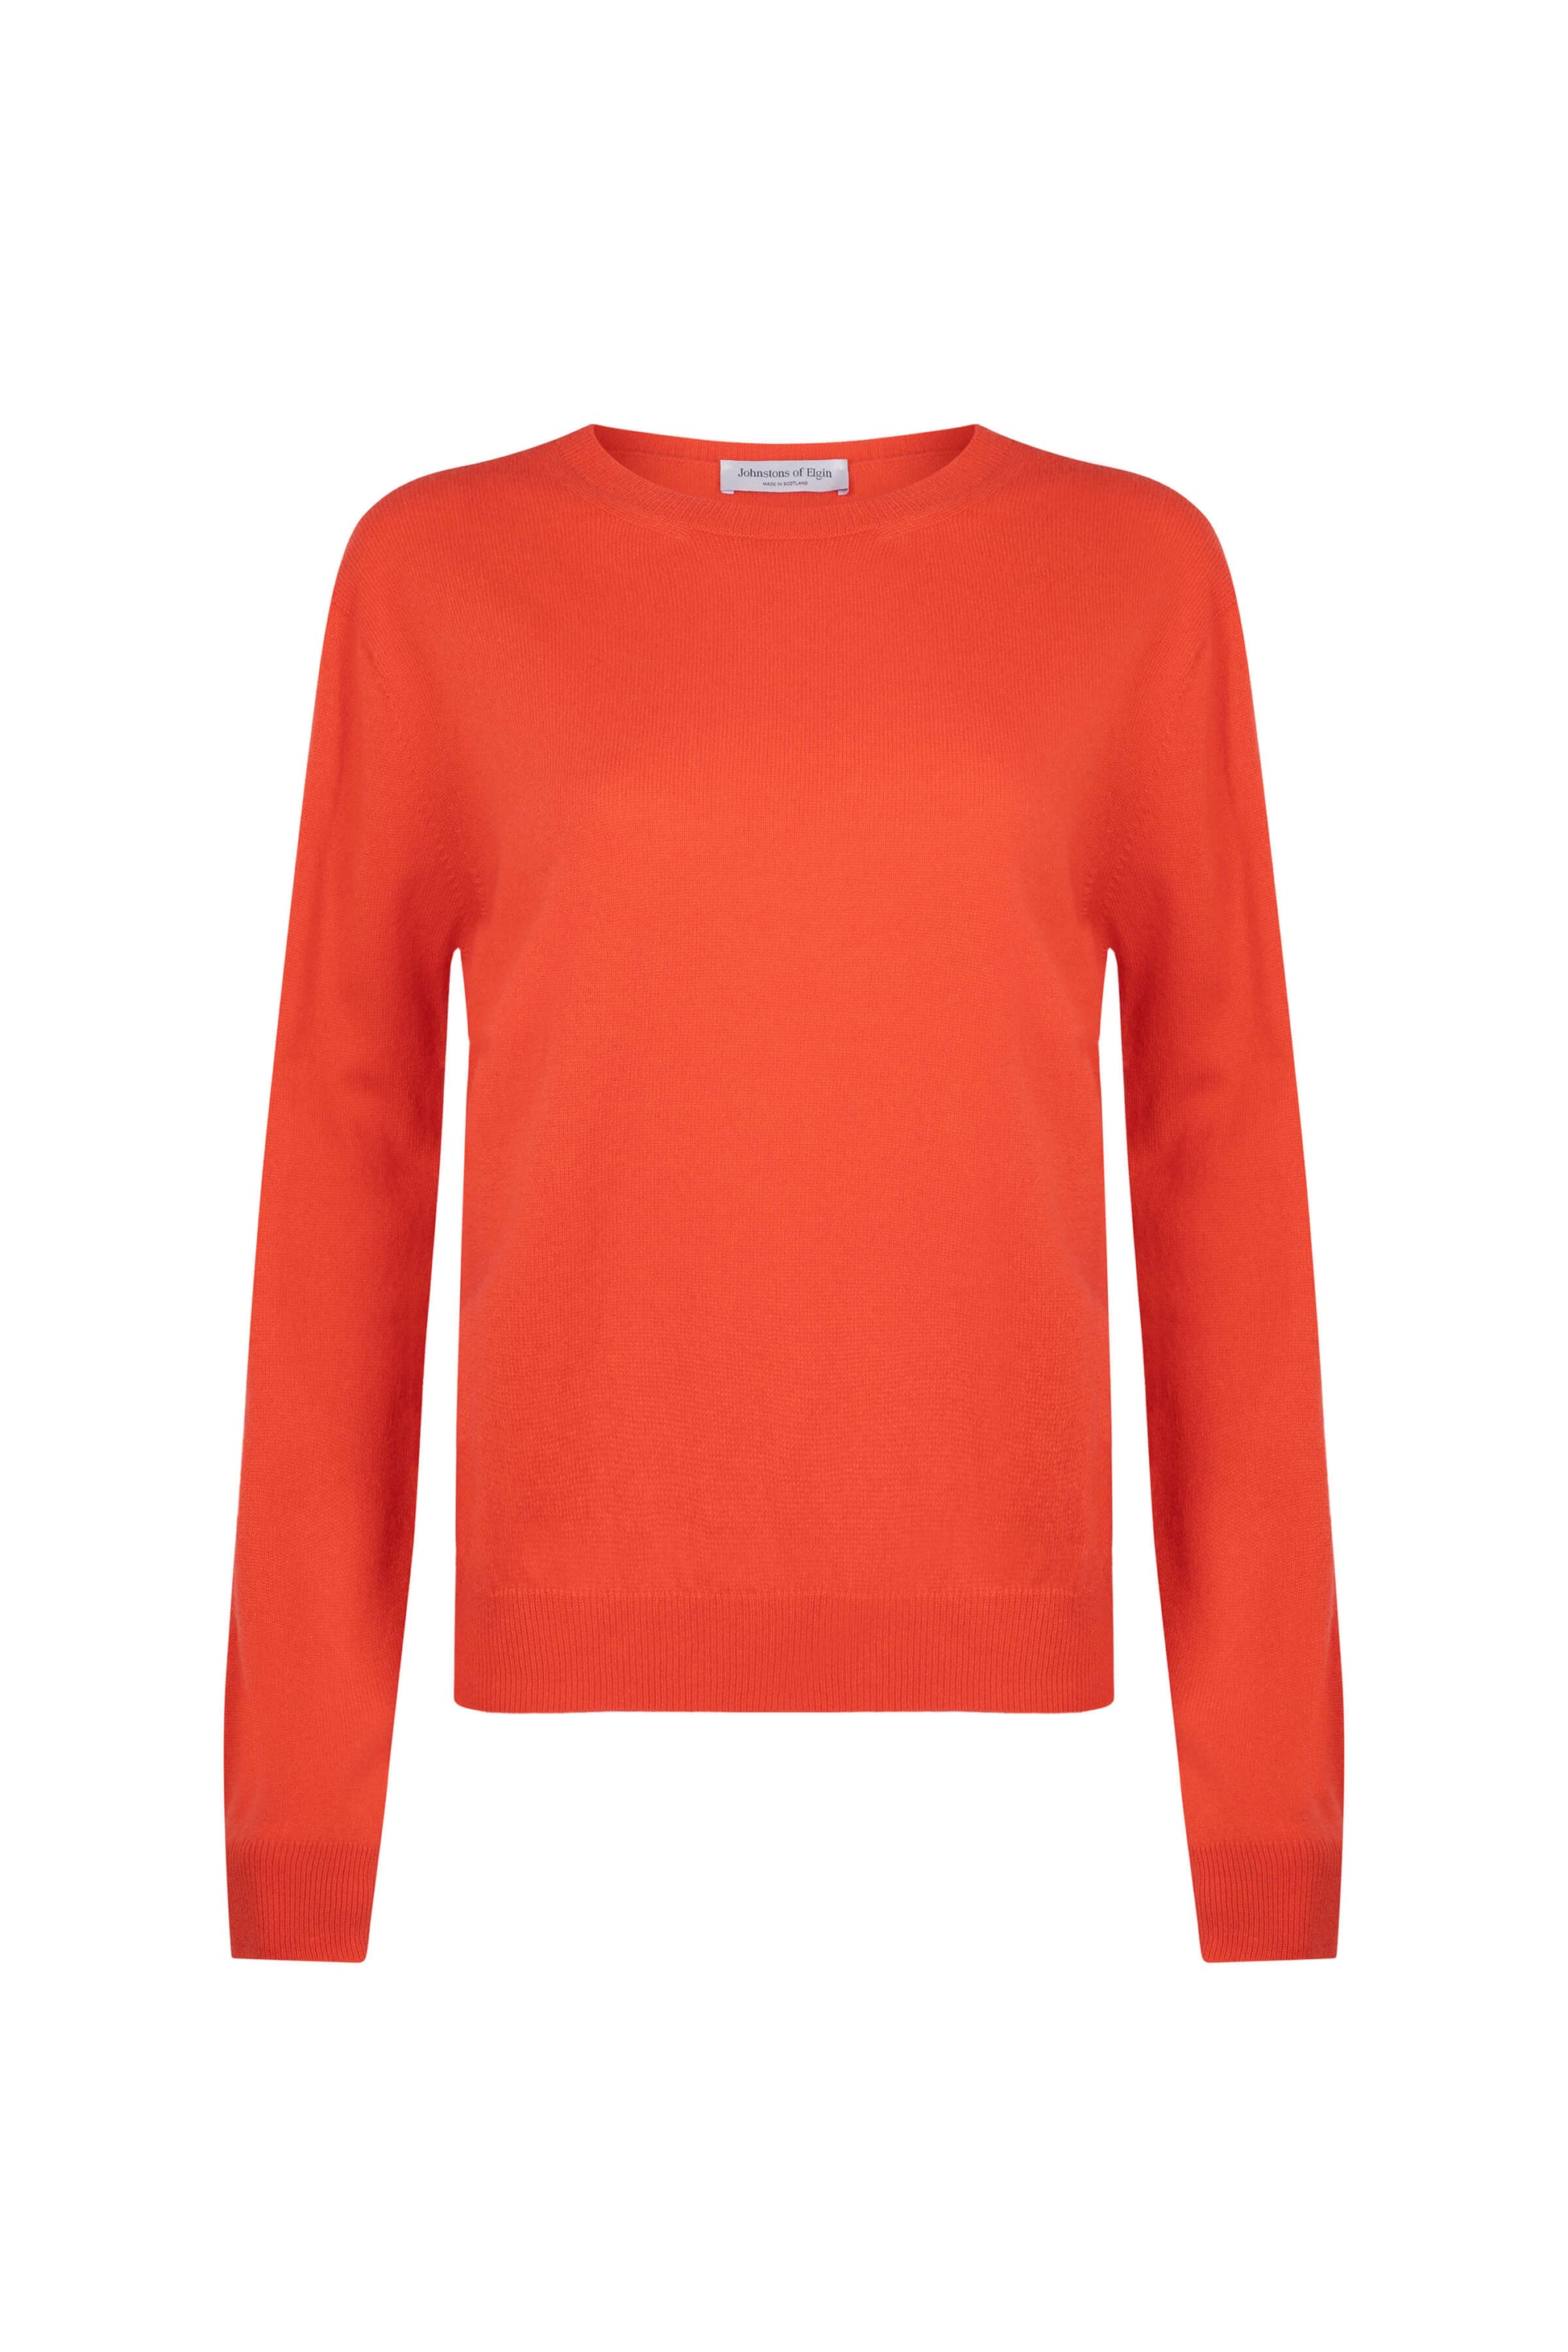 Johnstons of Elgin SS24 Women's Knitwear Coral Cropped Classic Cashmere Round Neck KAI05142SG4262